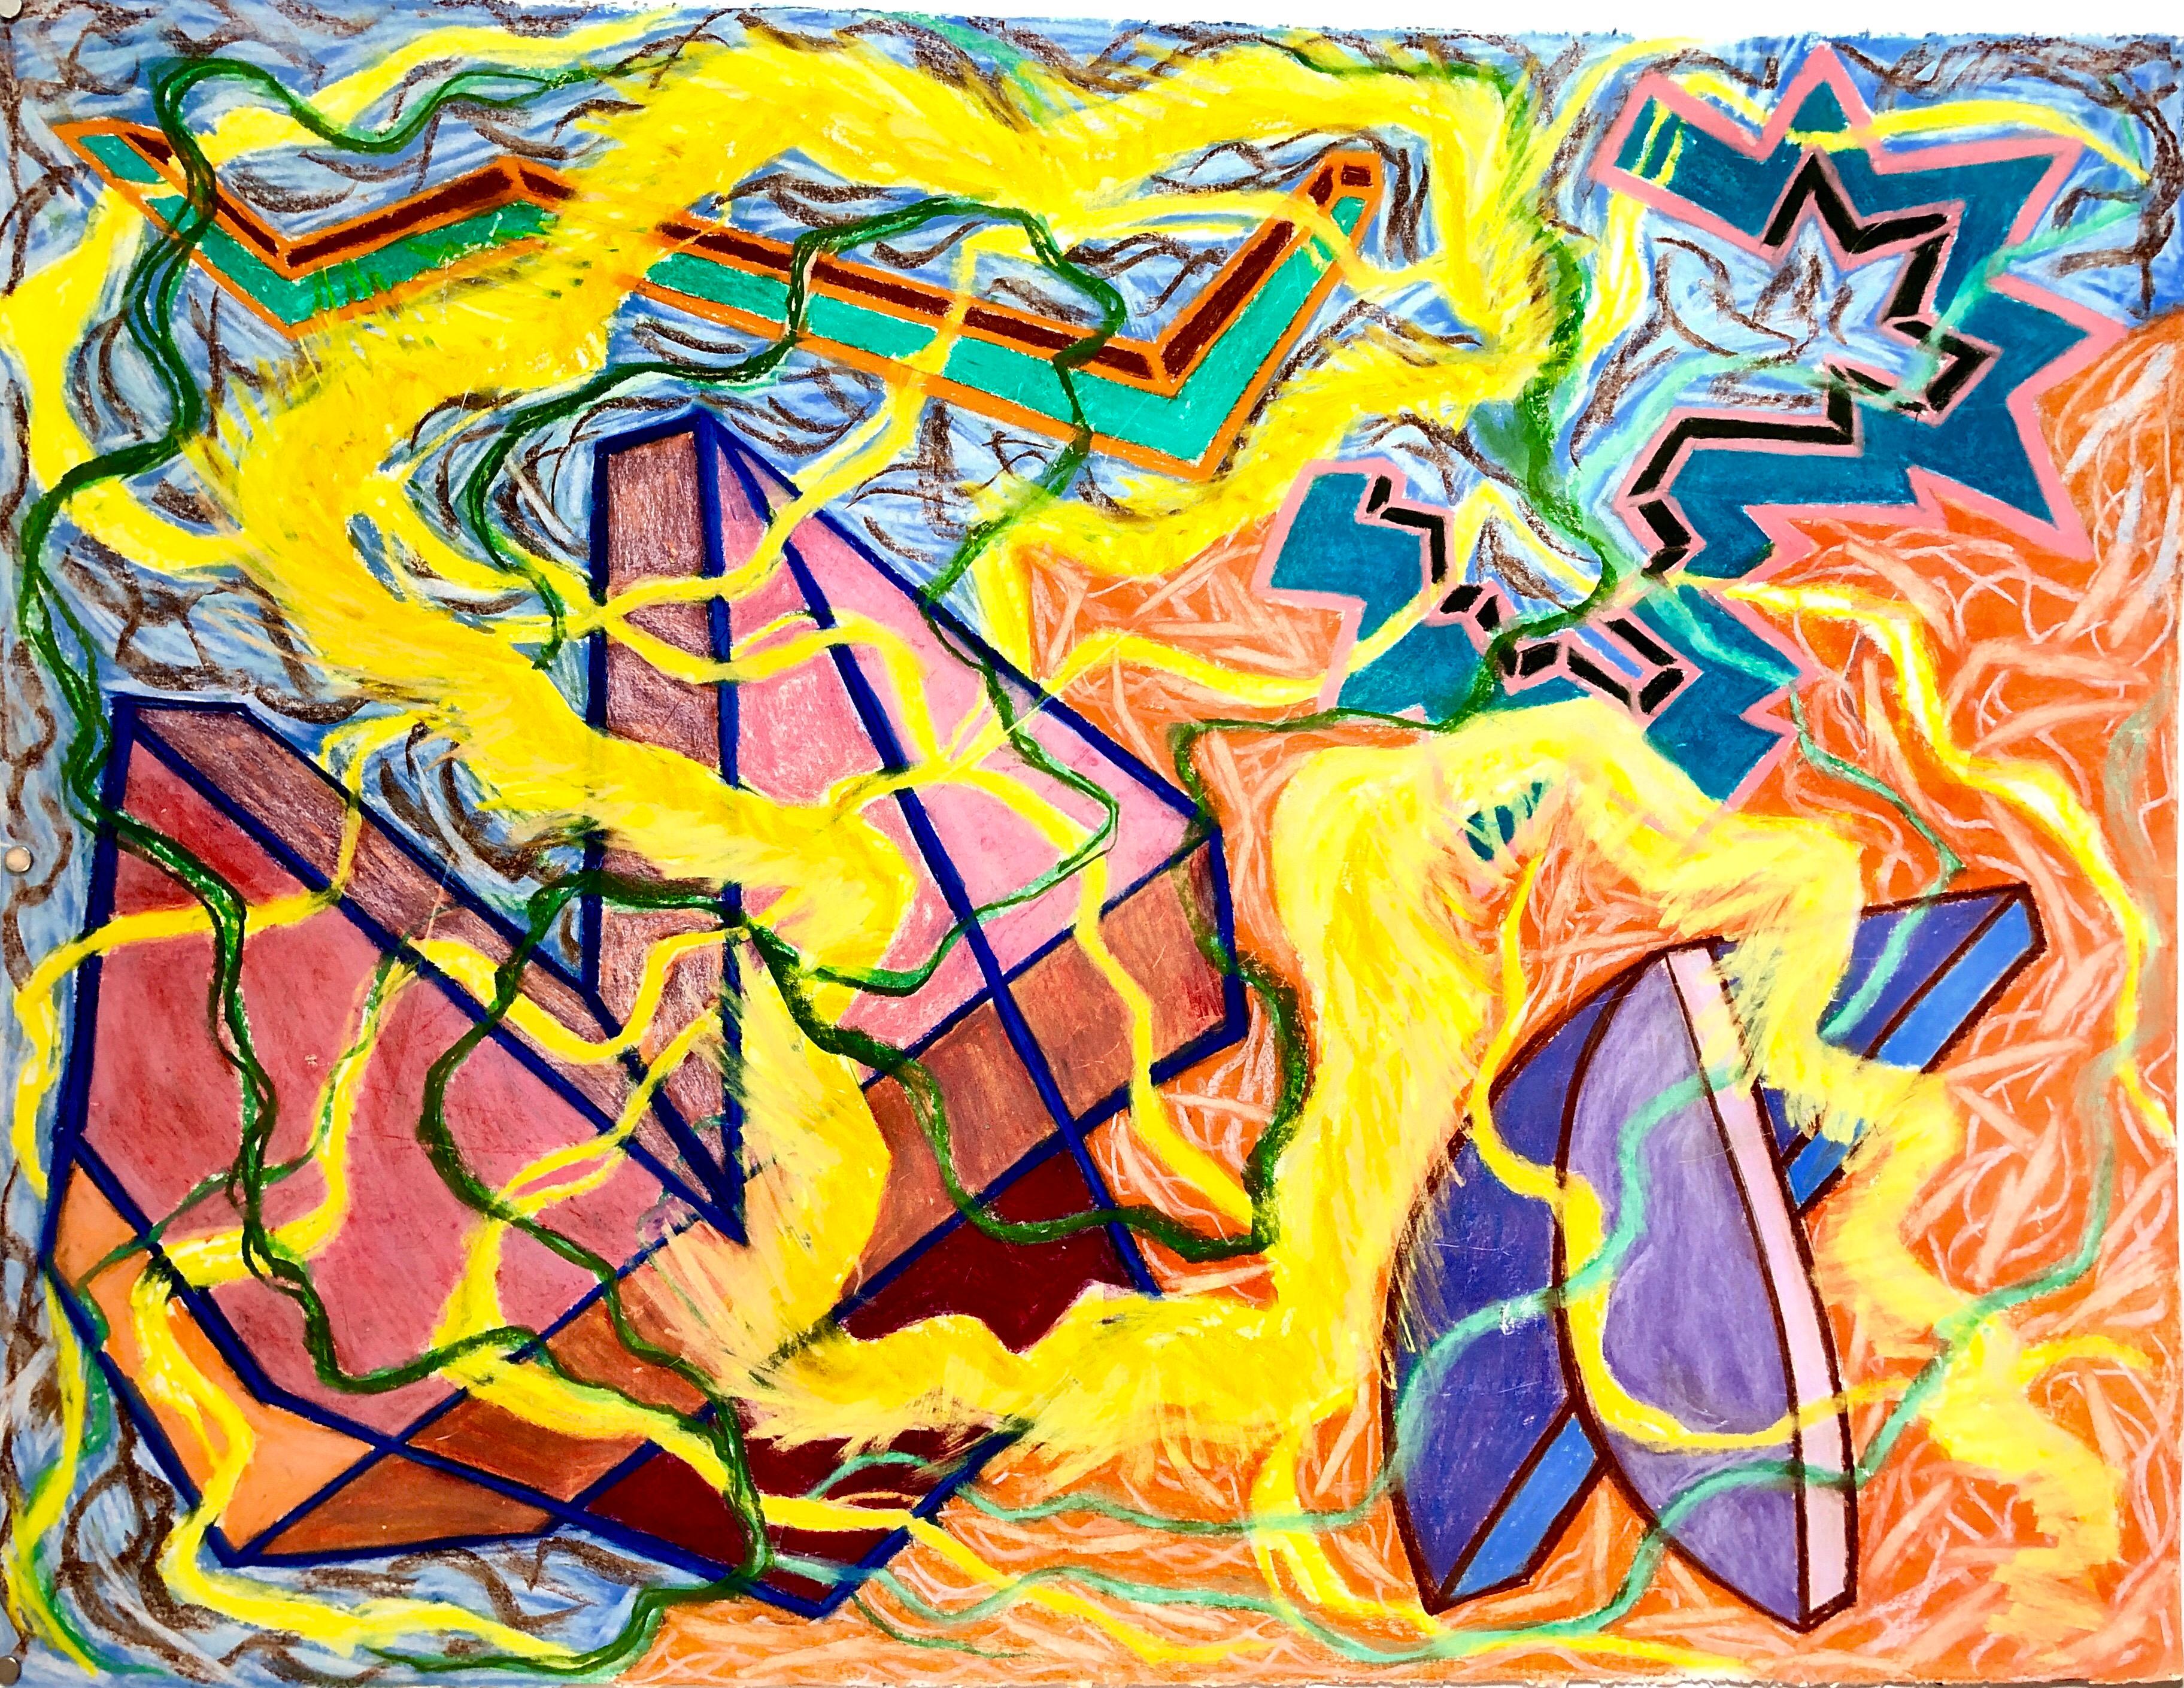 This is a large colorful vibrant pastel painting on paper, hand signed and dated 1981. Titled "Sarog". 

Joan Thorne (1943-) is a New York artist nationally and internationally recognized. A third generation Abstract Expressionist who has exhibited